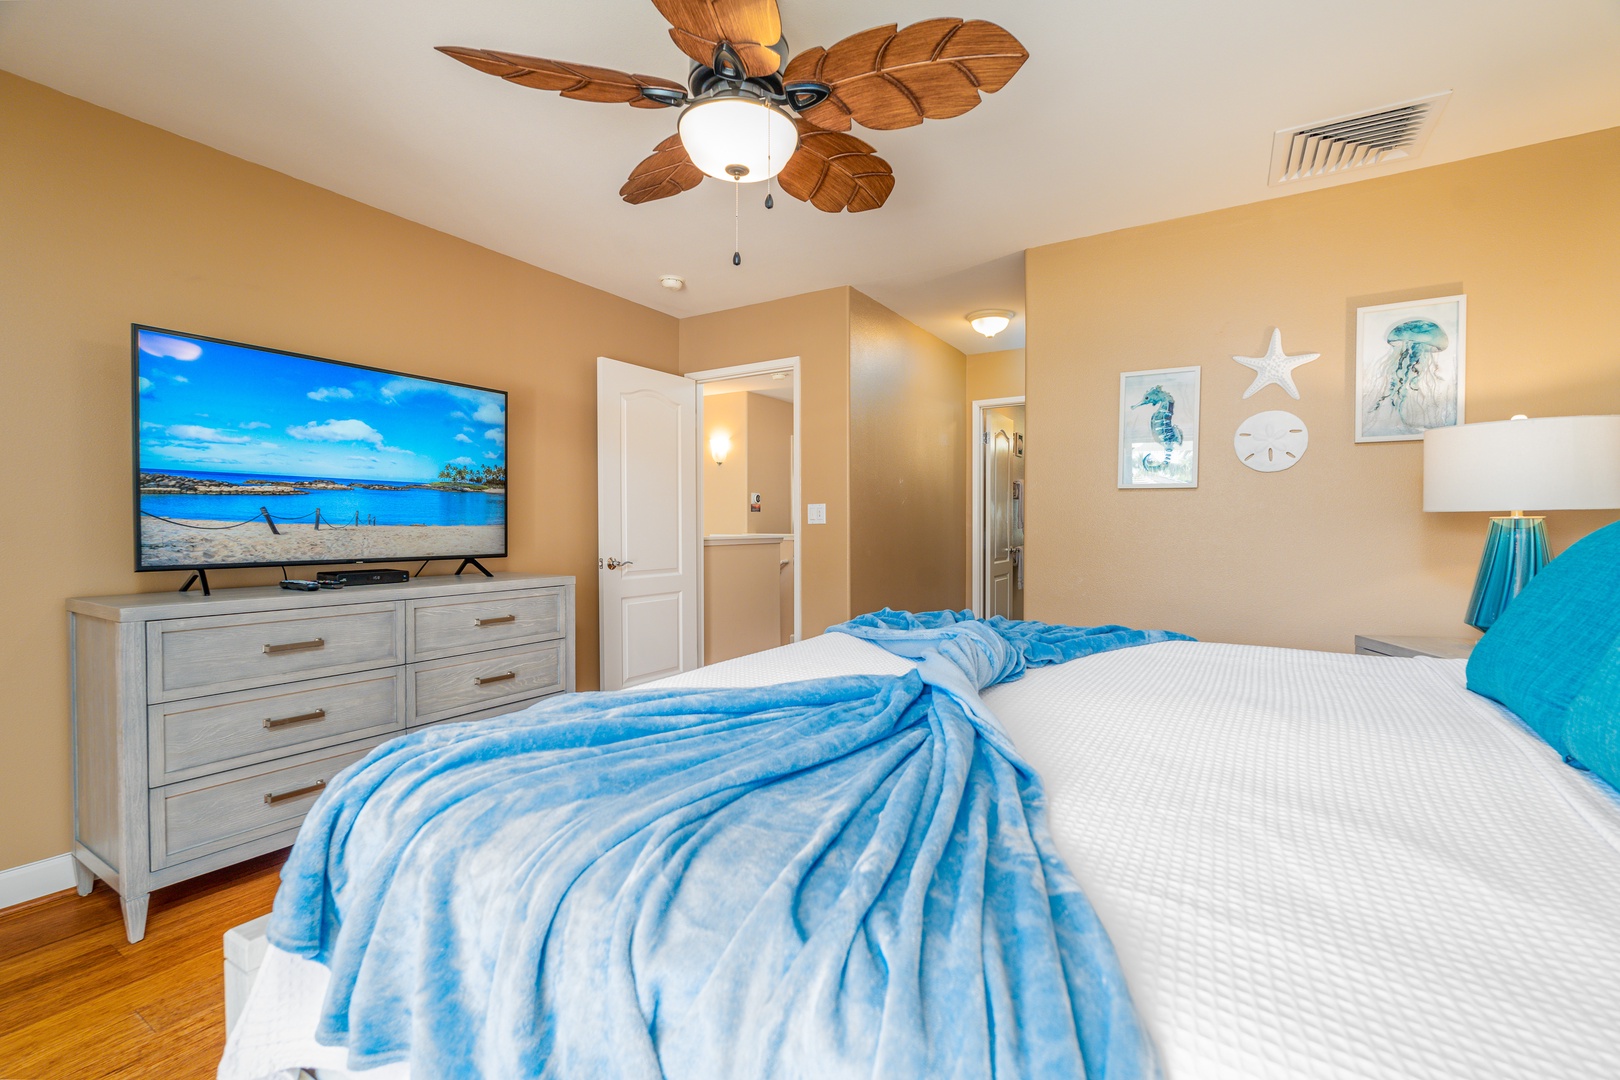 Kapolei Vacation Rentals, Ko Olina Kai 1081C - The primary guest bedroom upstairs with a dresser and TV.